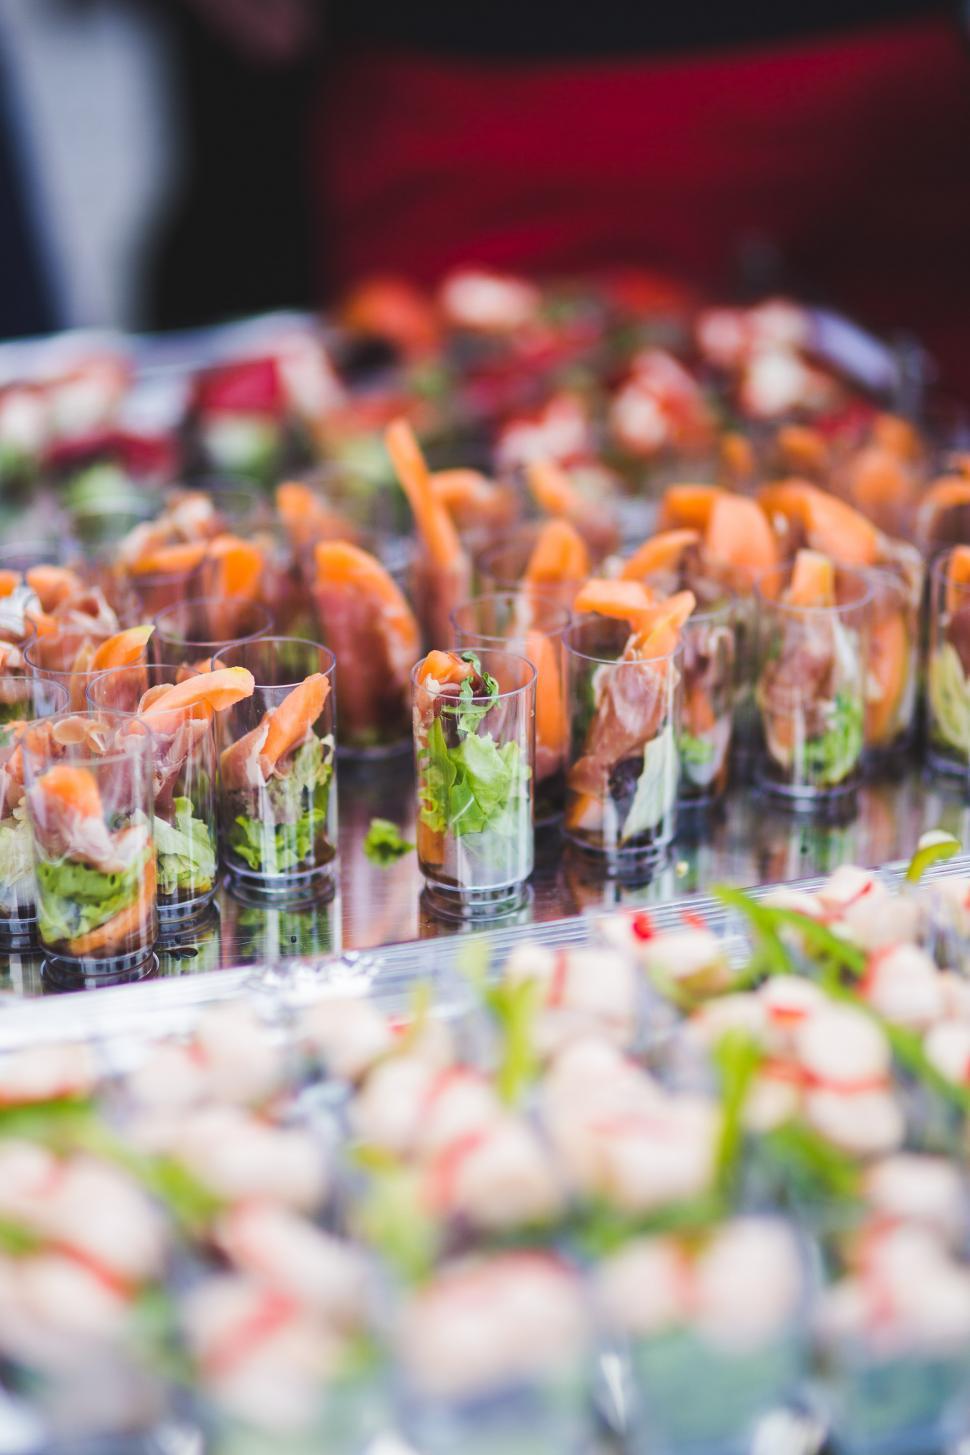 Free Image of Table Filled With Glasses of Food 